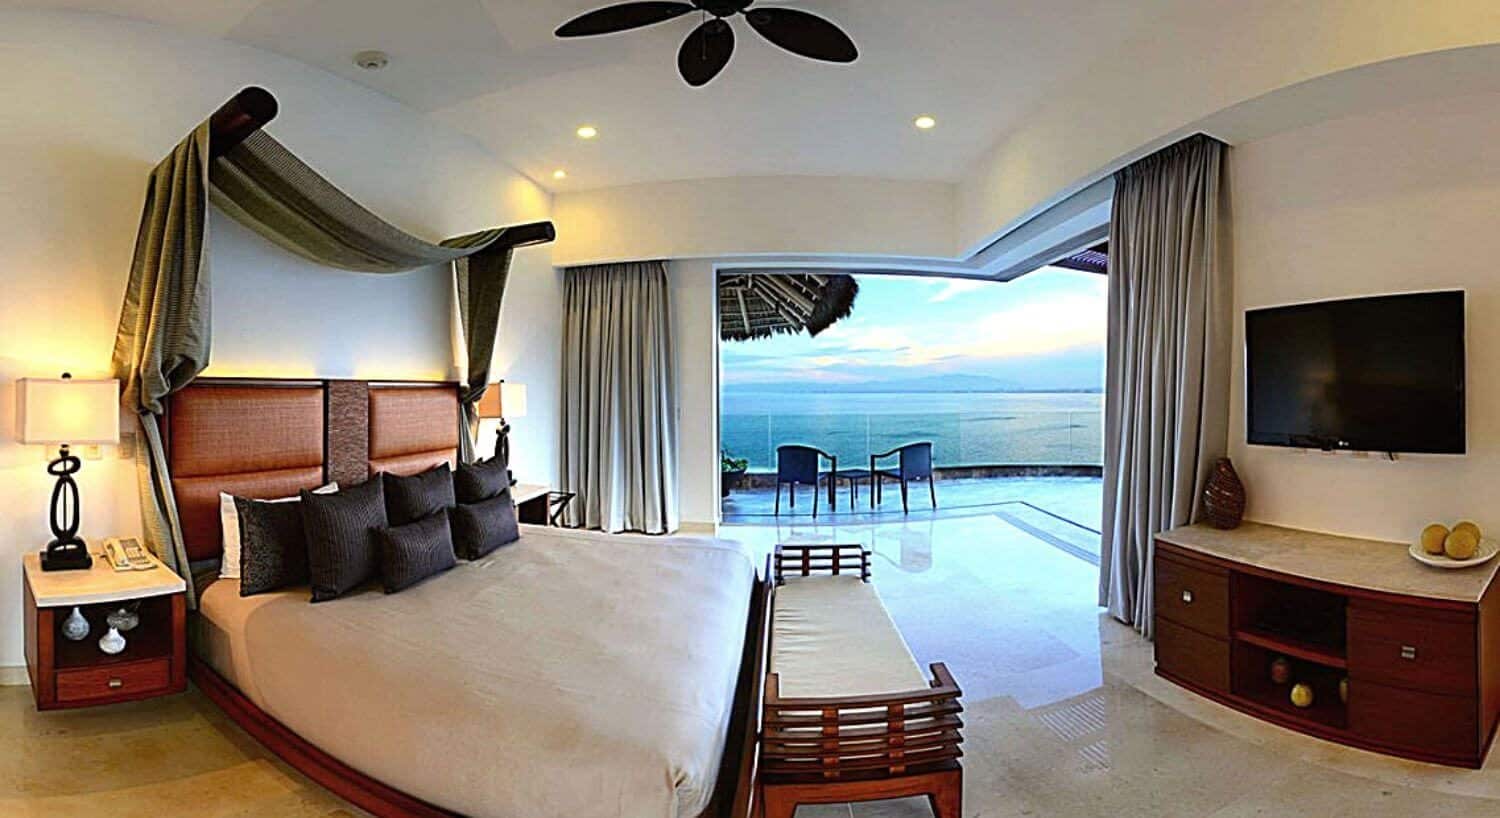 A spacious bedroom with King bed with canopy of green curtains, brown accent pillows, nightstands with lamps on either side, a cushioned bench at the foot of the bed, a dresser and flat screen TV, and sliding glass doors opened to a balcony with table and chairs facing the ocean.